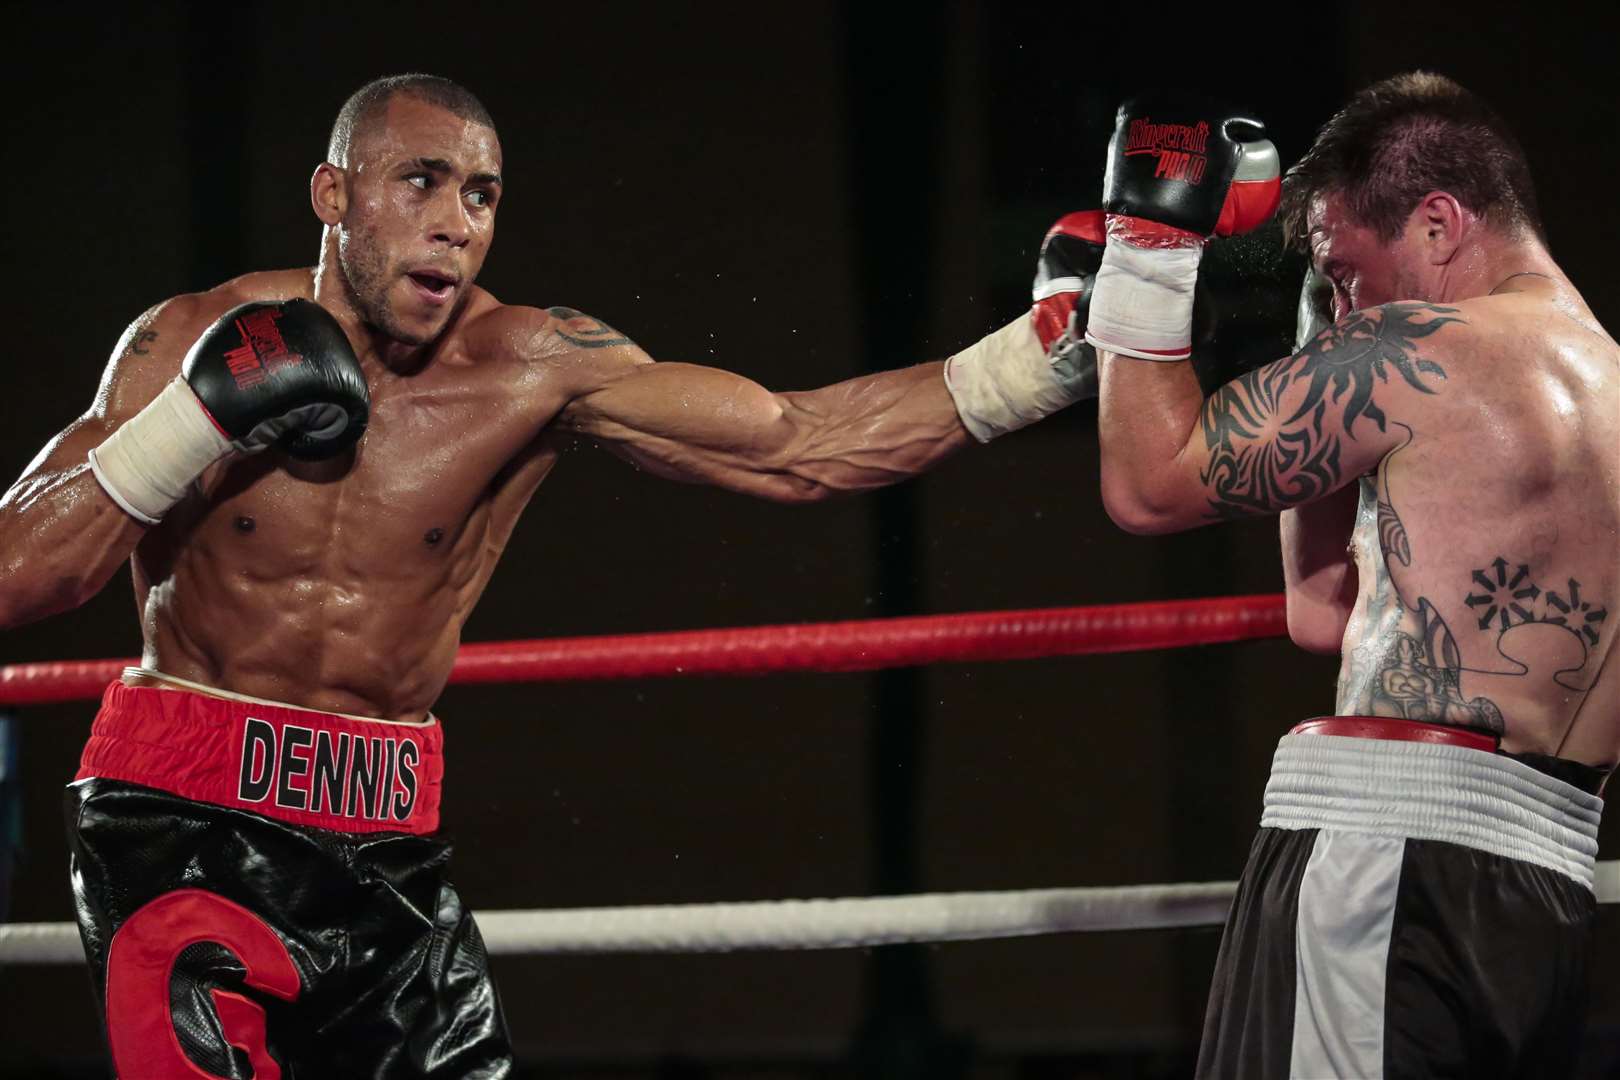 Grant Dennis is eyeing a title shot Picture: Countrywide Photographic